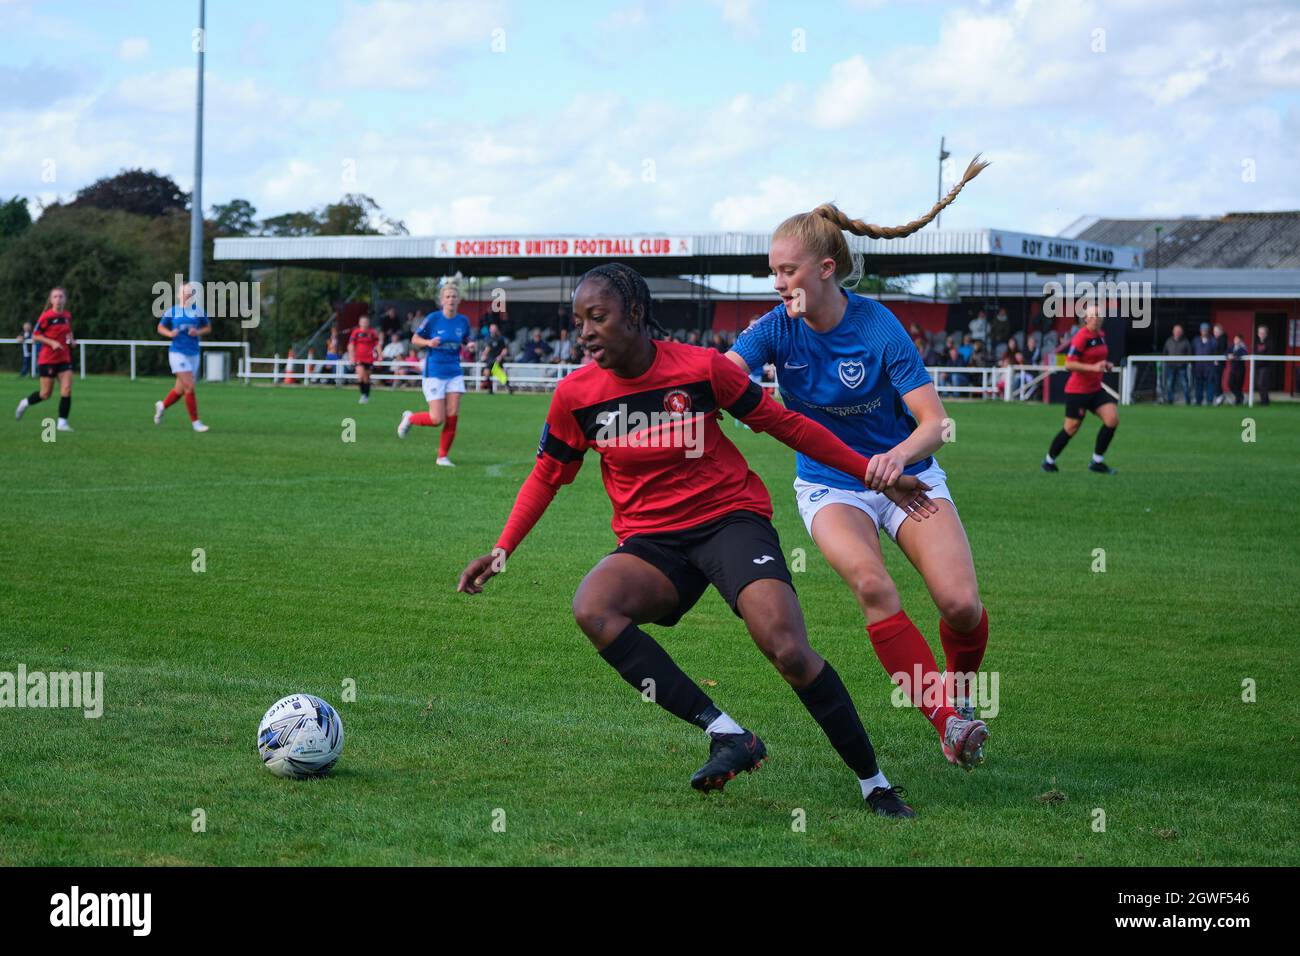 Strood, UK. 03rd Oct, 2021. Kara Fordjour (11 Gillingham) holding off the oppostion player during the FA Womens National League Southern Premier game between Gillingham and Portsmouth at Rochester United Sports Ground in Strood, England. Credit: SPP Sport Press Photo. /Alamy Live News Stock Photo